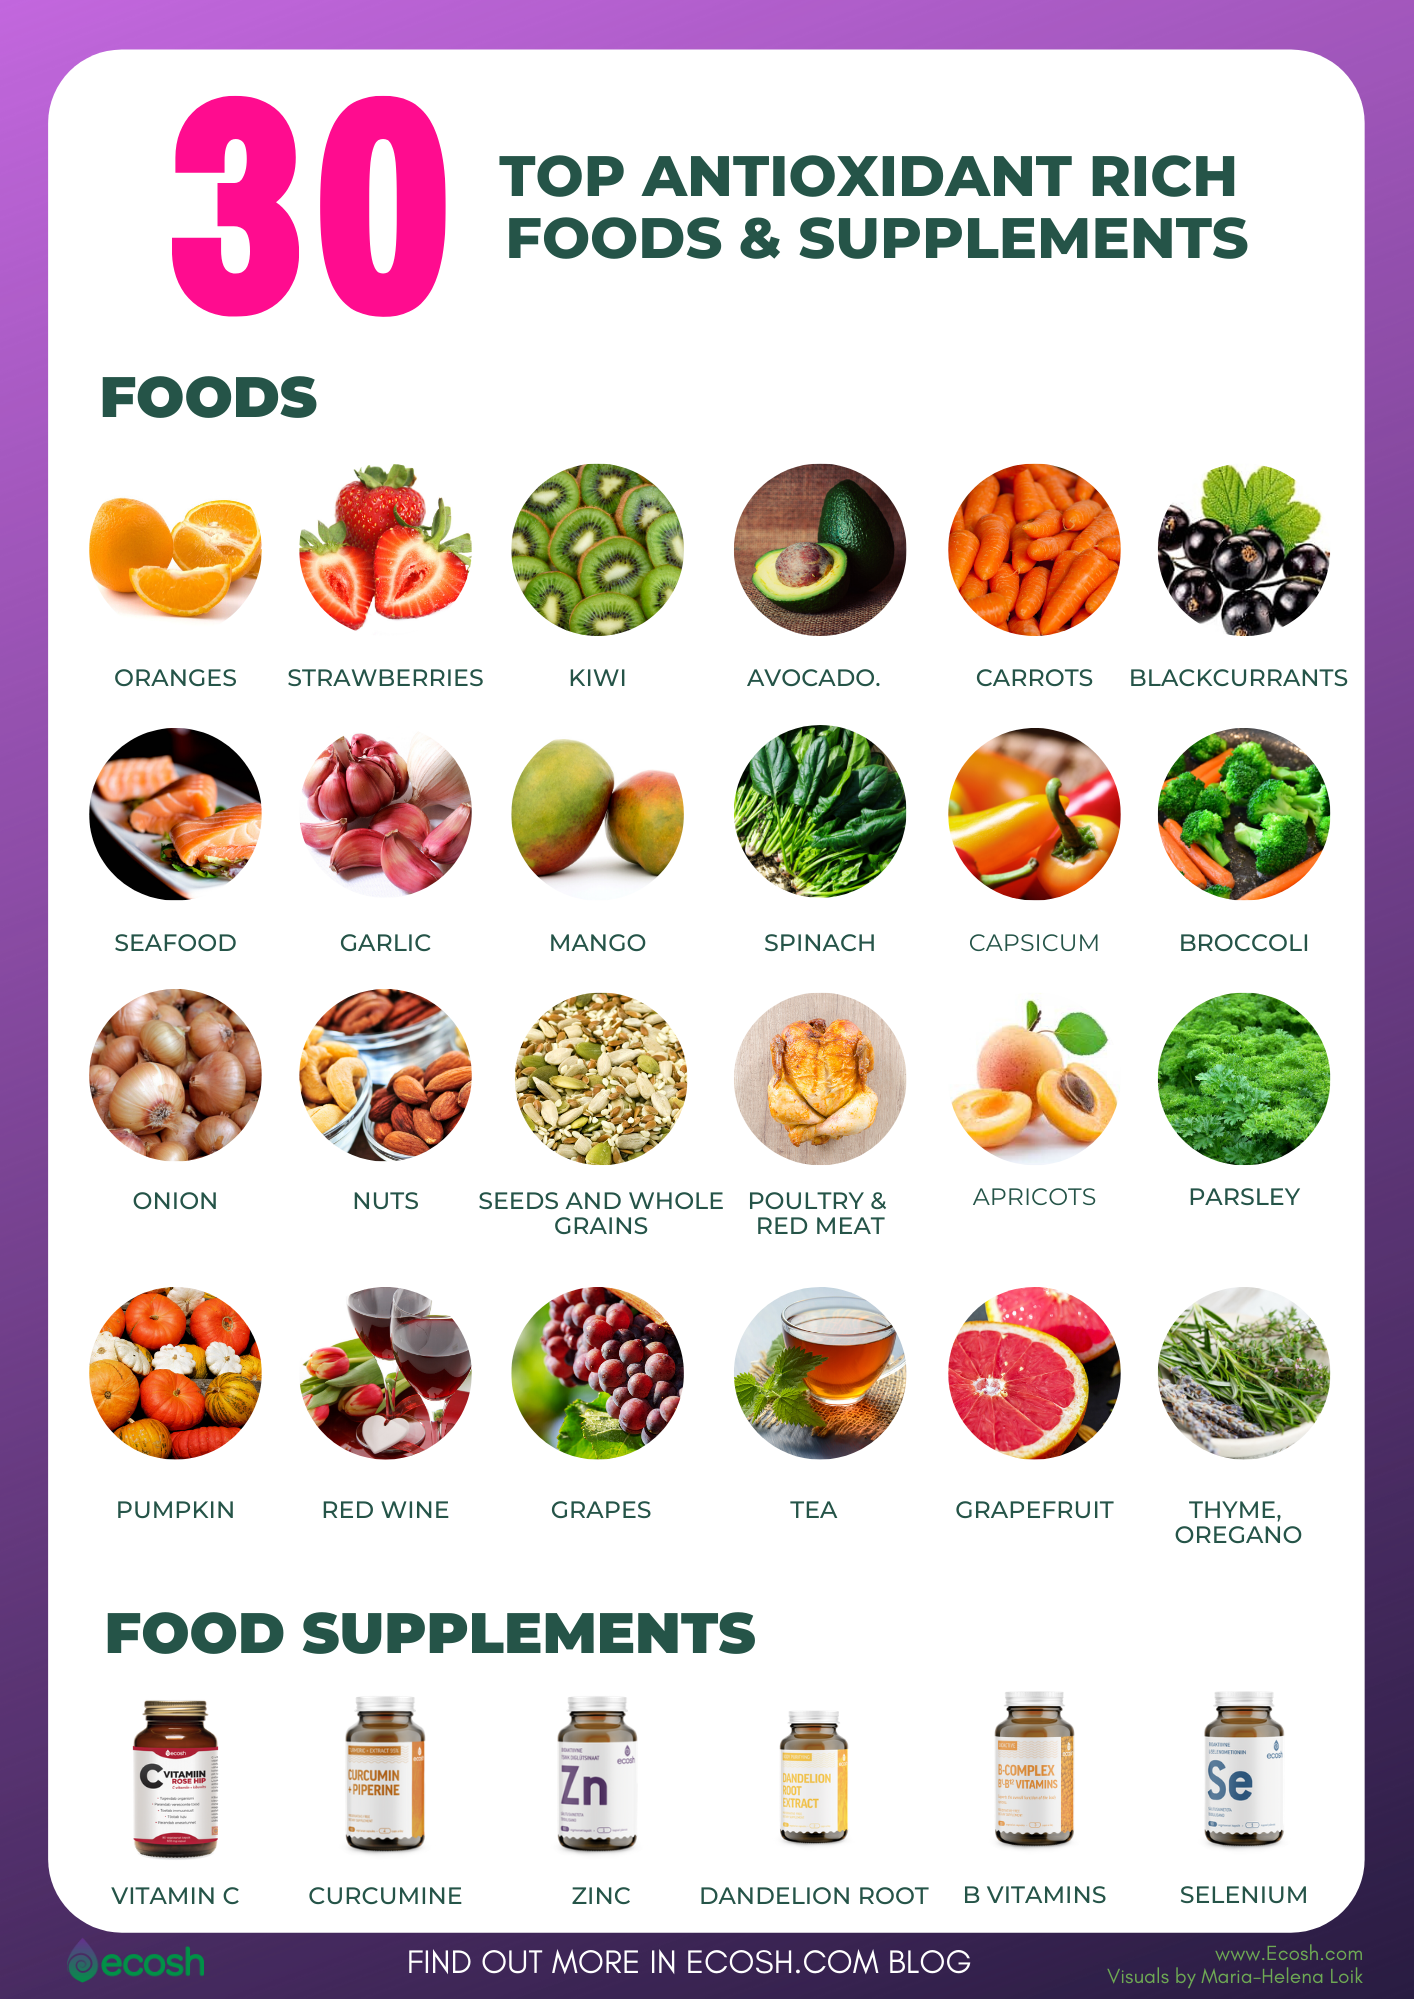 ANTIOXIDANTS - Health Benefits, Deficiency Causes, Symptoms and